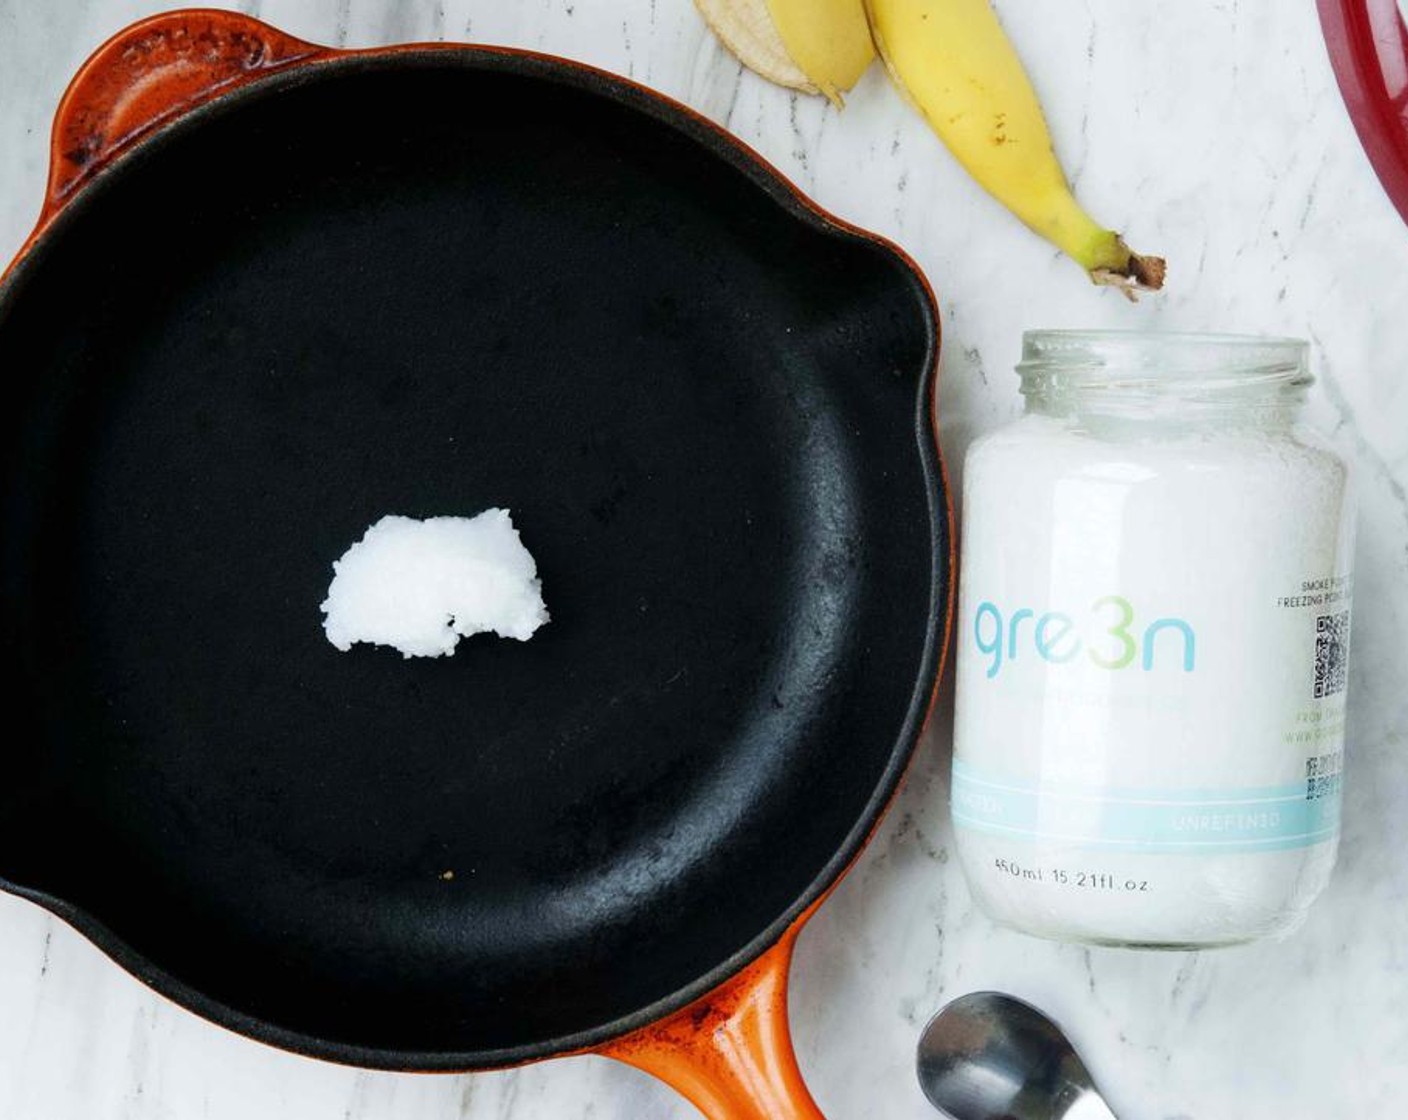 step 1 In a skillet, melt Extra-Virgin Coconut Oil (1 tsp), cut the Banana (1) in half length-wise and give it a quick blister on one side. The natural sugar in the banana will slightly caramelize making it crunchy.